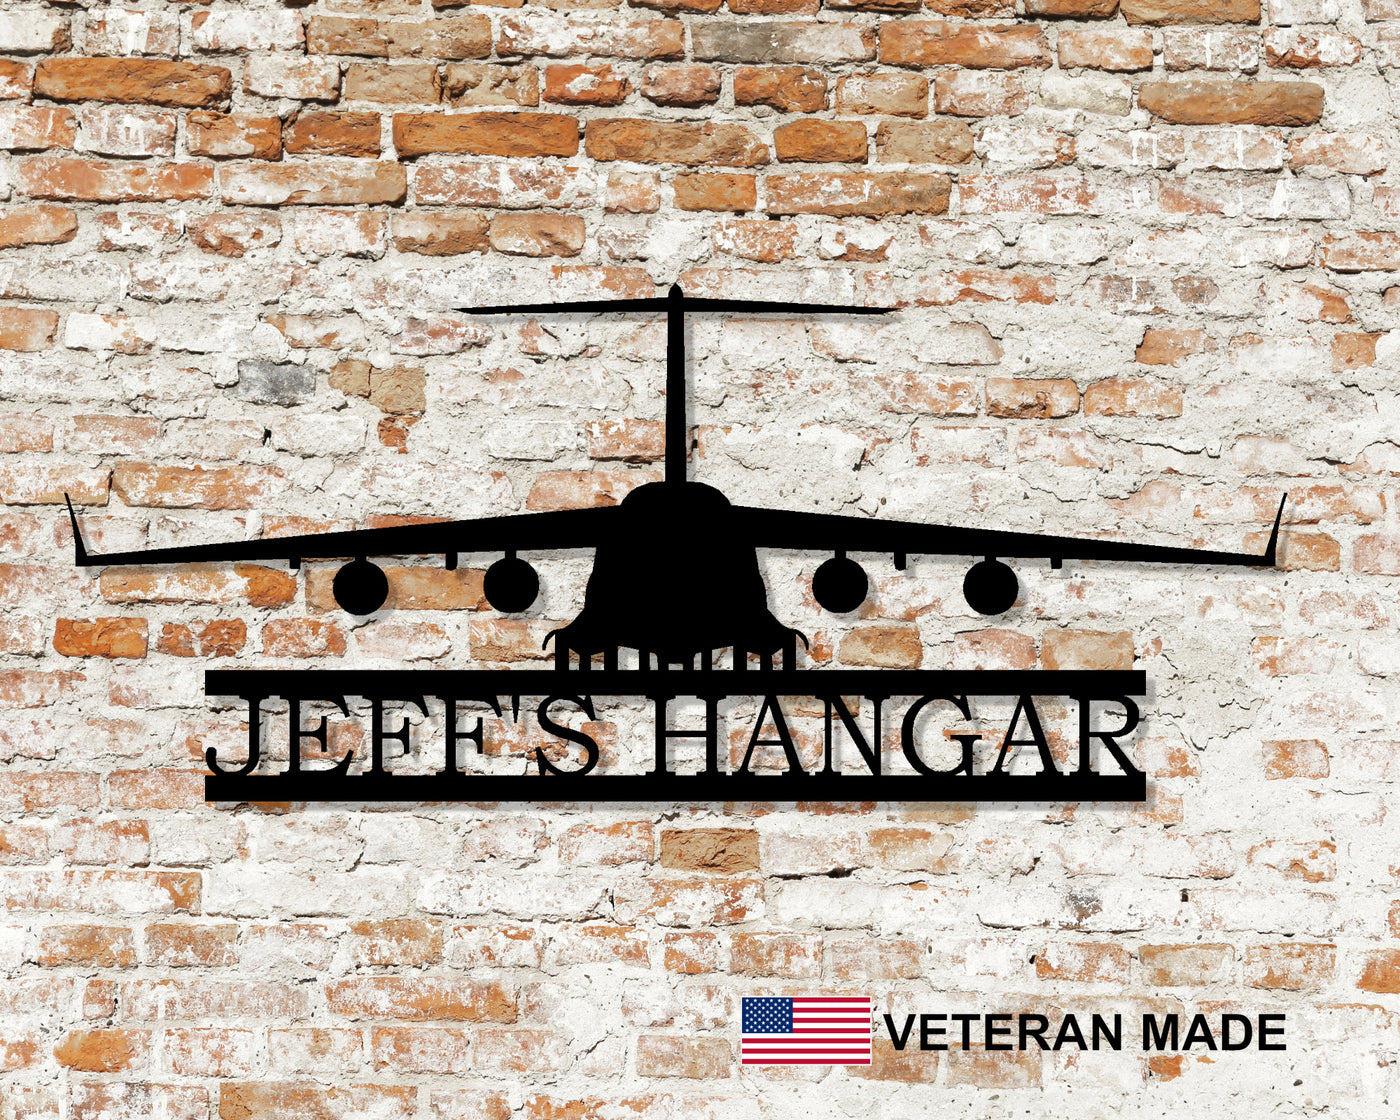 Personalized C-5 Galaxy Aircraft Metal Sign - Madison Iron and Wood - Personalized sign - metal outdoor decor - Steel deocrations - american made products - veteran owned business products - fencing decorations - fencing supplies - custom wall decorations - personalized wall signs - steel - decorative post caps - steel post caps - metal post caps - brackets - structural brackets - home improvement - easter - easter decorations - easter gift - easter yard decor